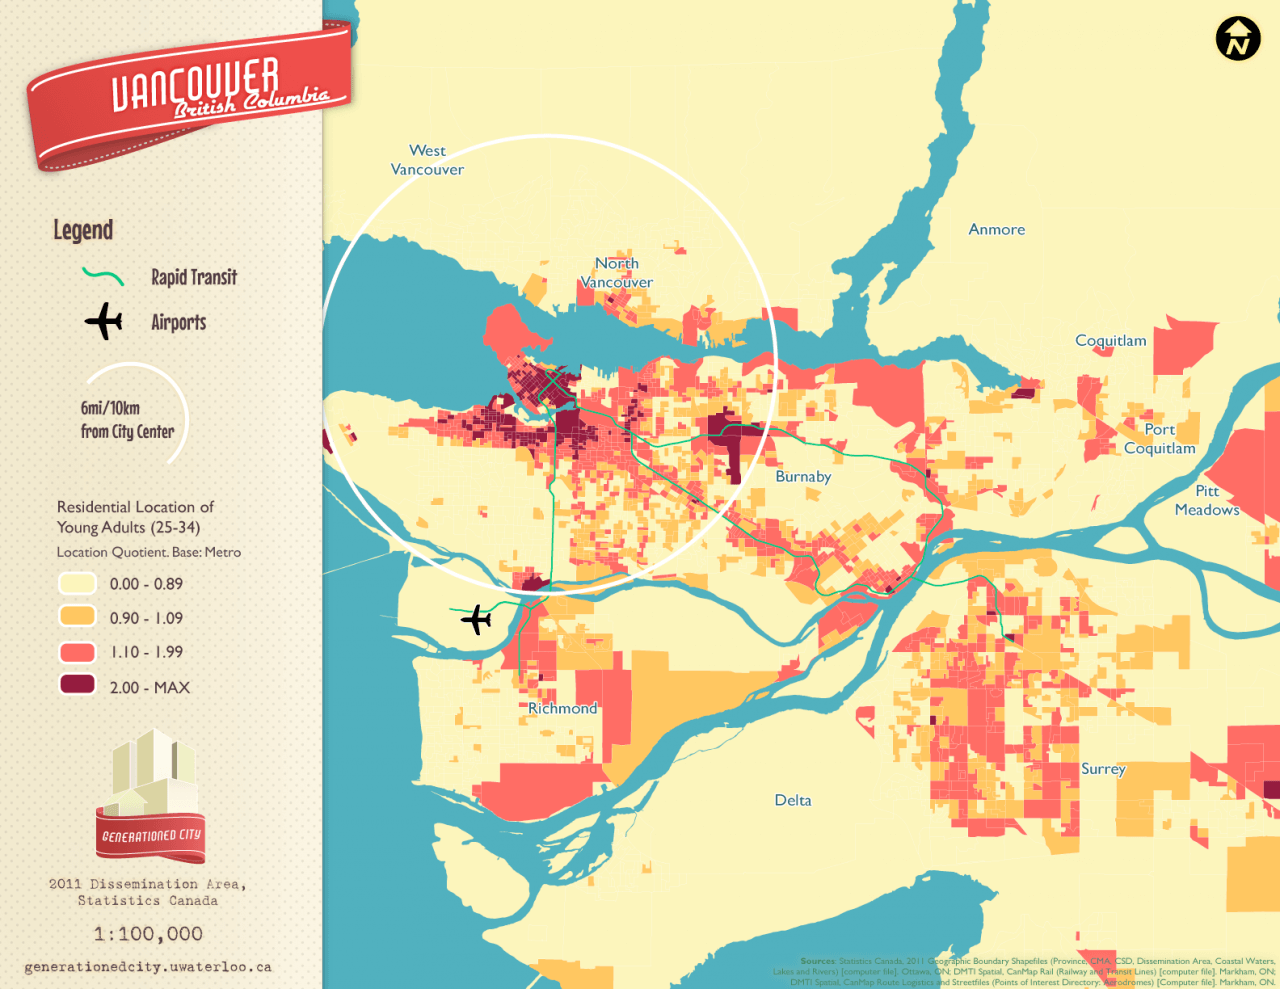 Residential location of young adults in Vancouver.